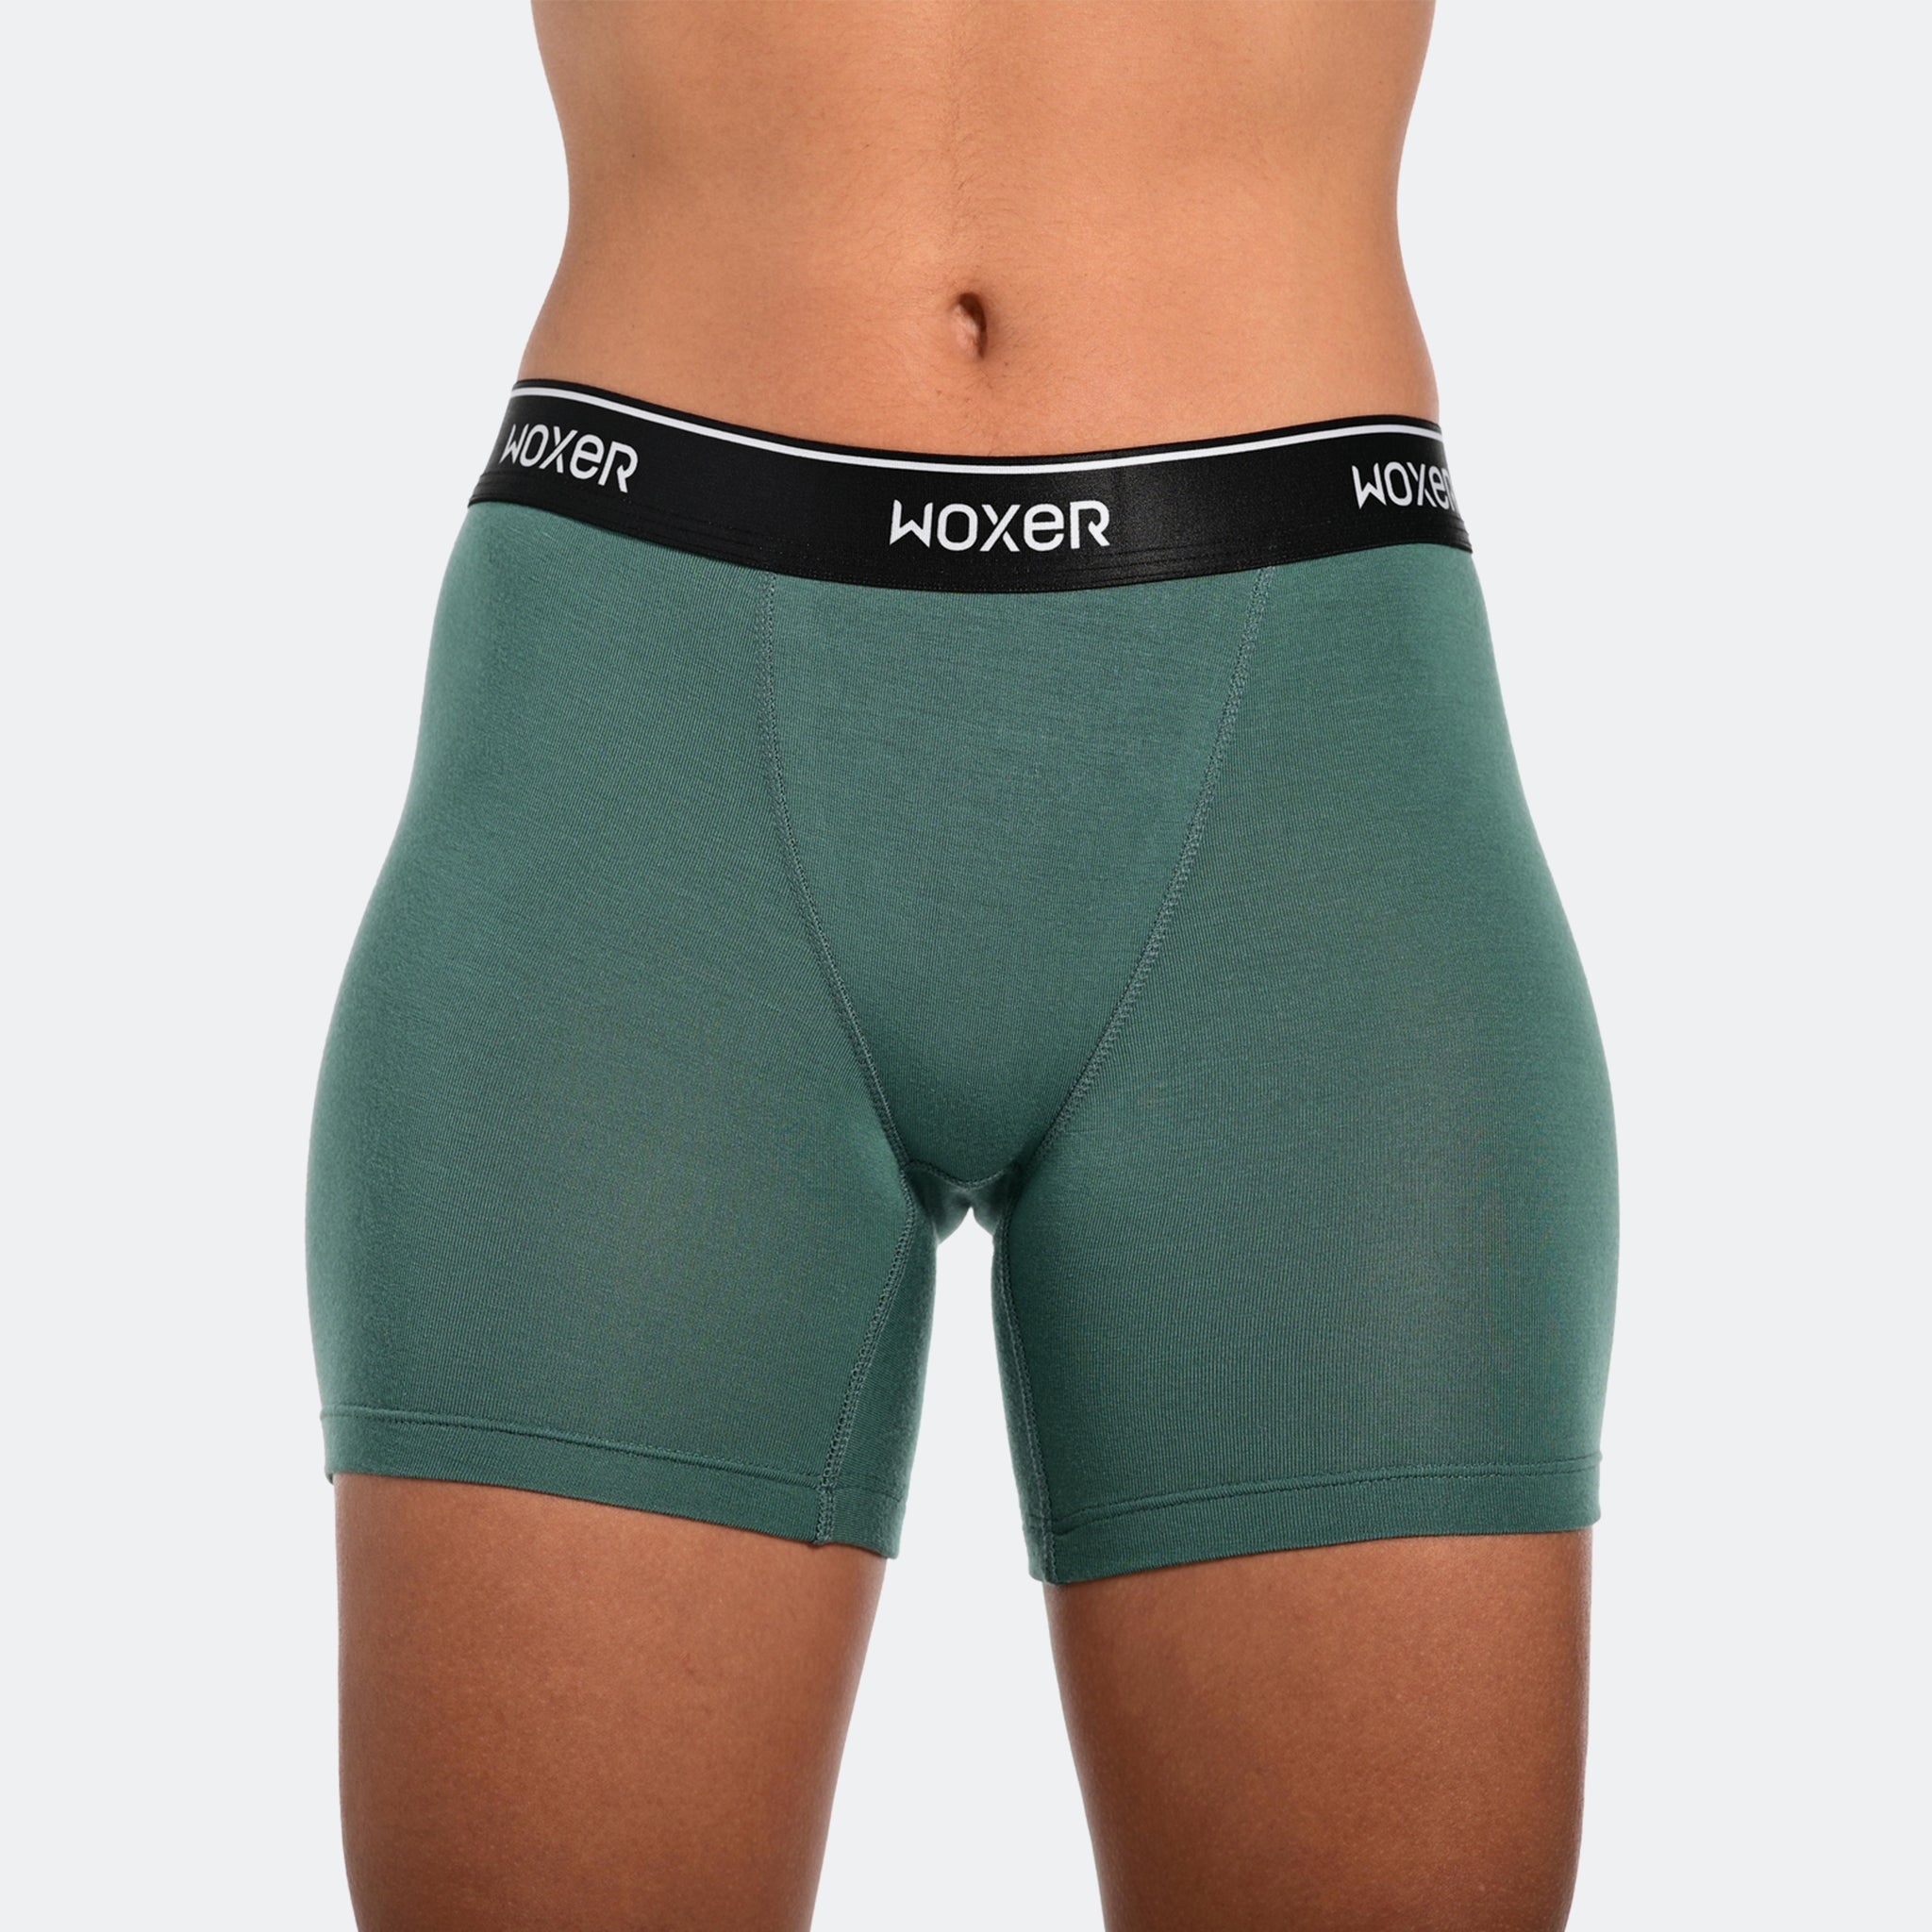 The Most Sold Boxers In The World 😍  Woxer gets rid of your panty lines,  maximizes your comfort, eliminates wedgies AND protects you from chafing.  What more could you dream of?